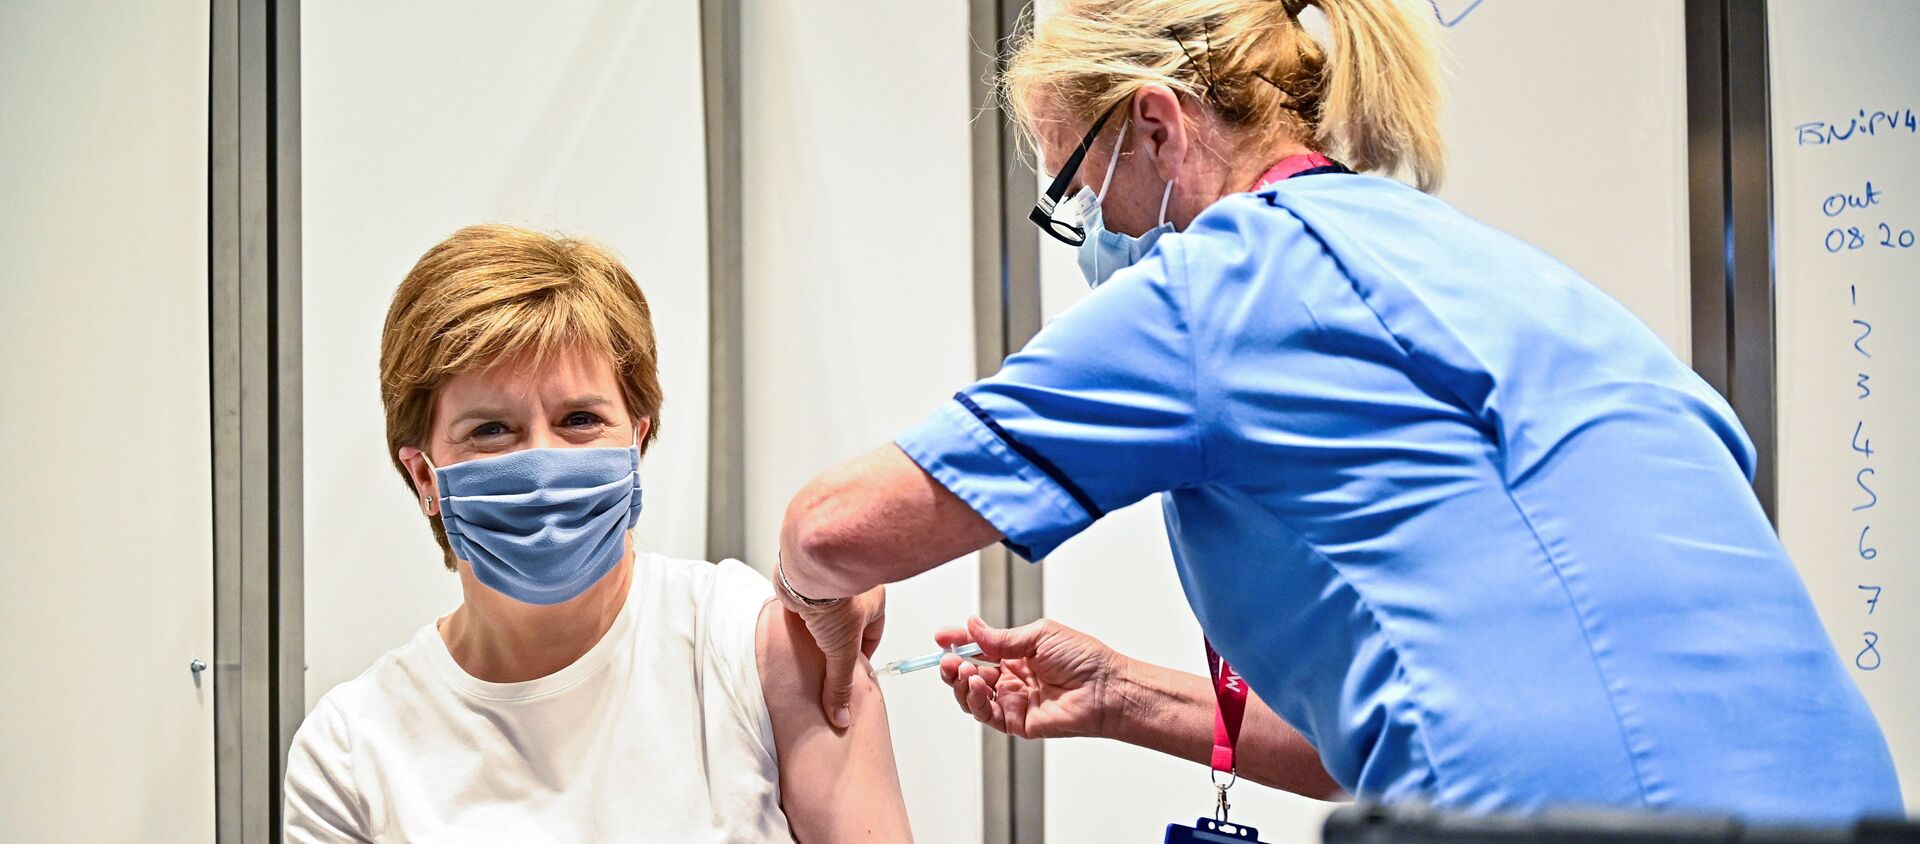 Scottish First Minister Nicola Sturgeon receives her second dose of the COVID-19 vaccine in Glasgow - Sputnik International, 1920, 13.07.2021